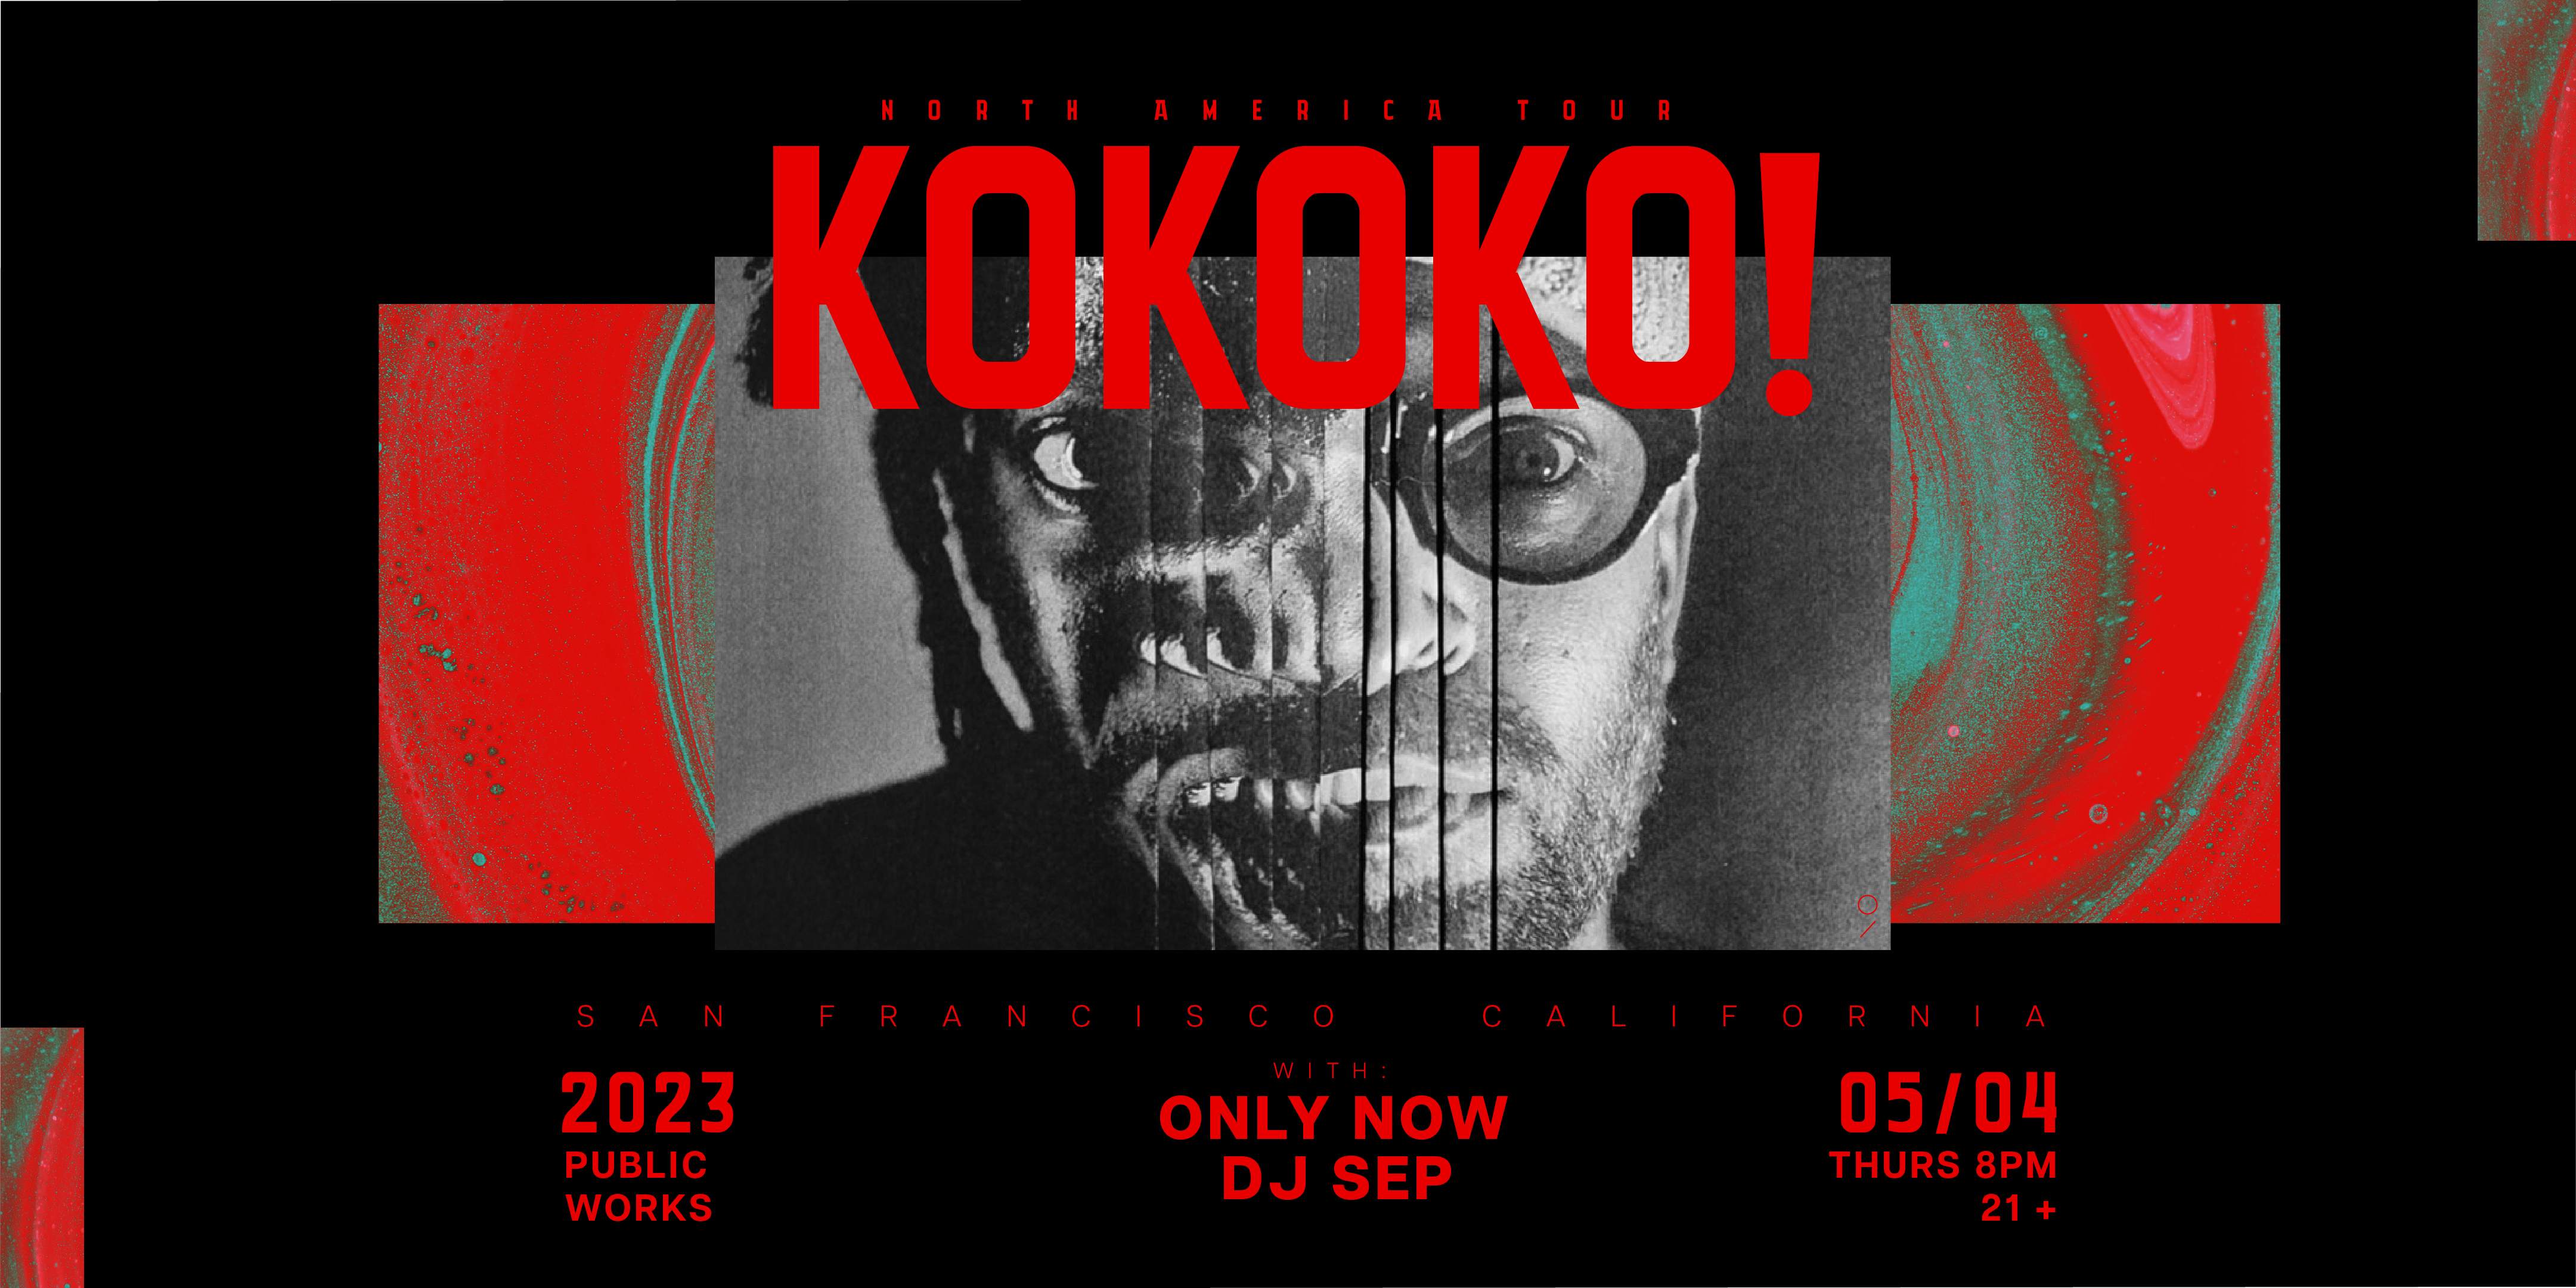 KOKOKO! presented by Public Works & White Crate - フライヤー表